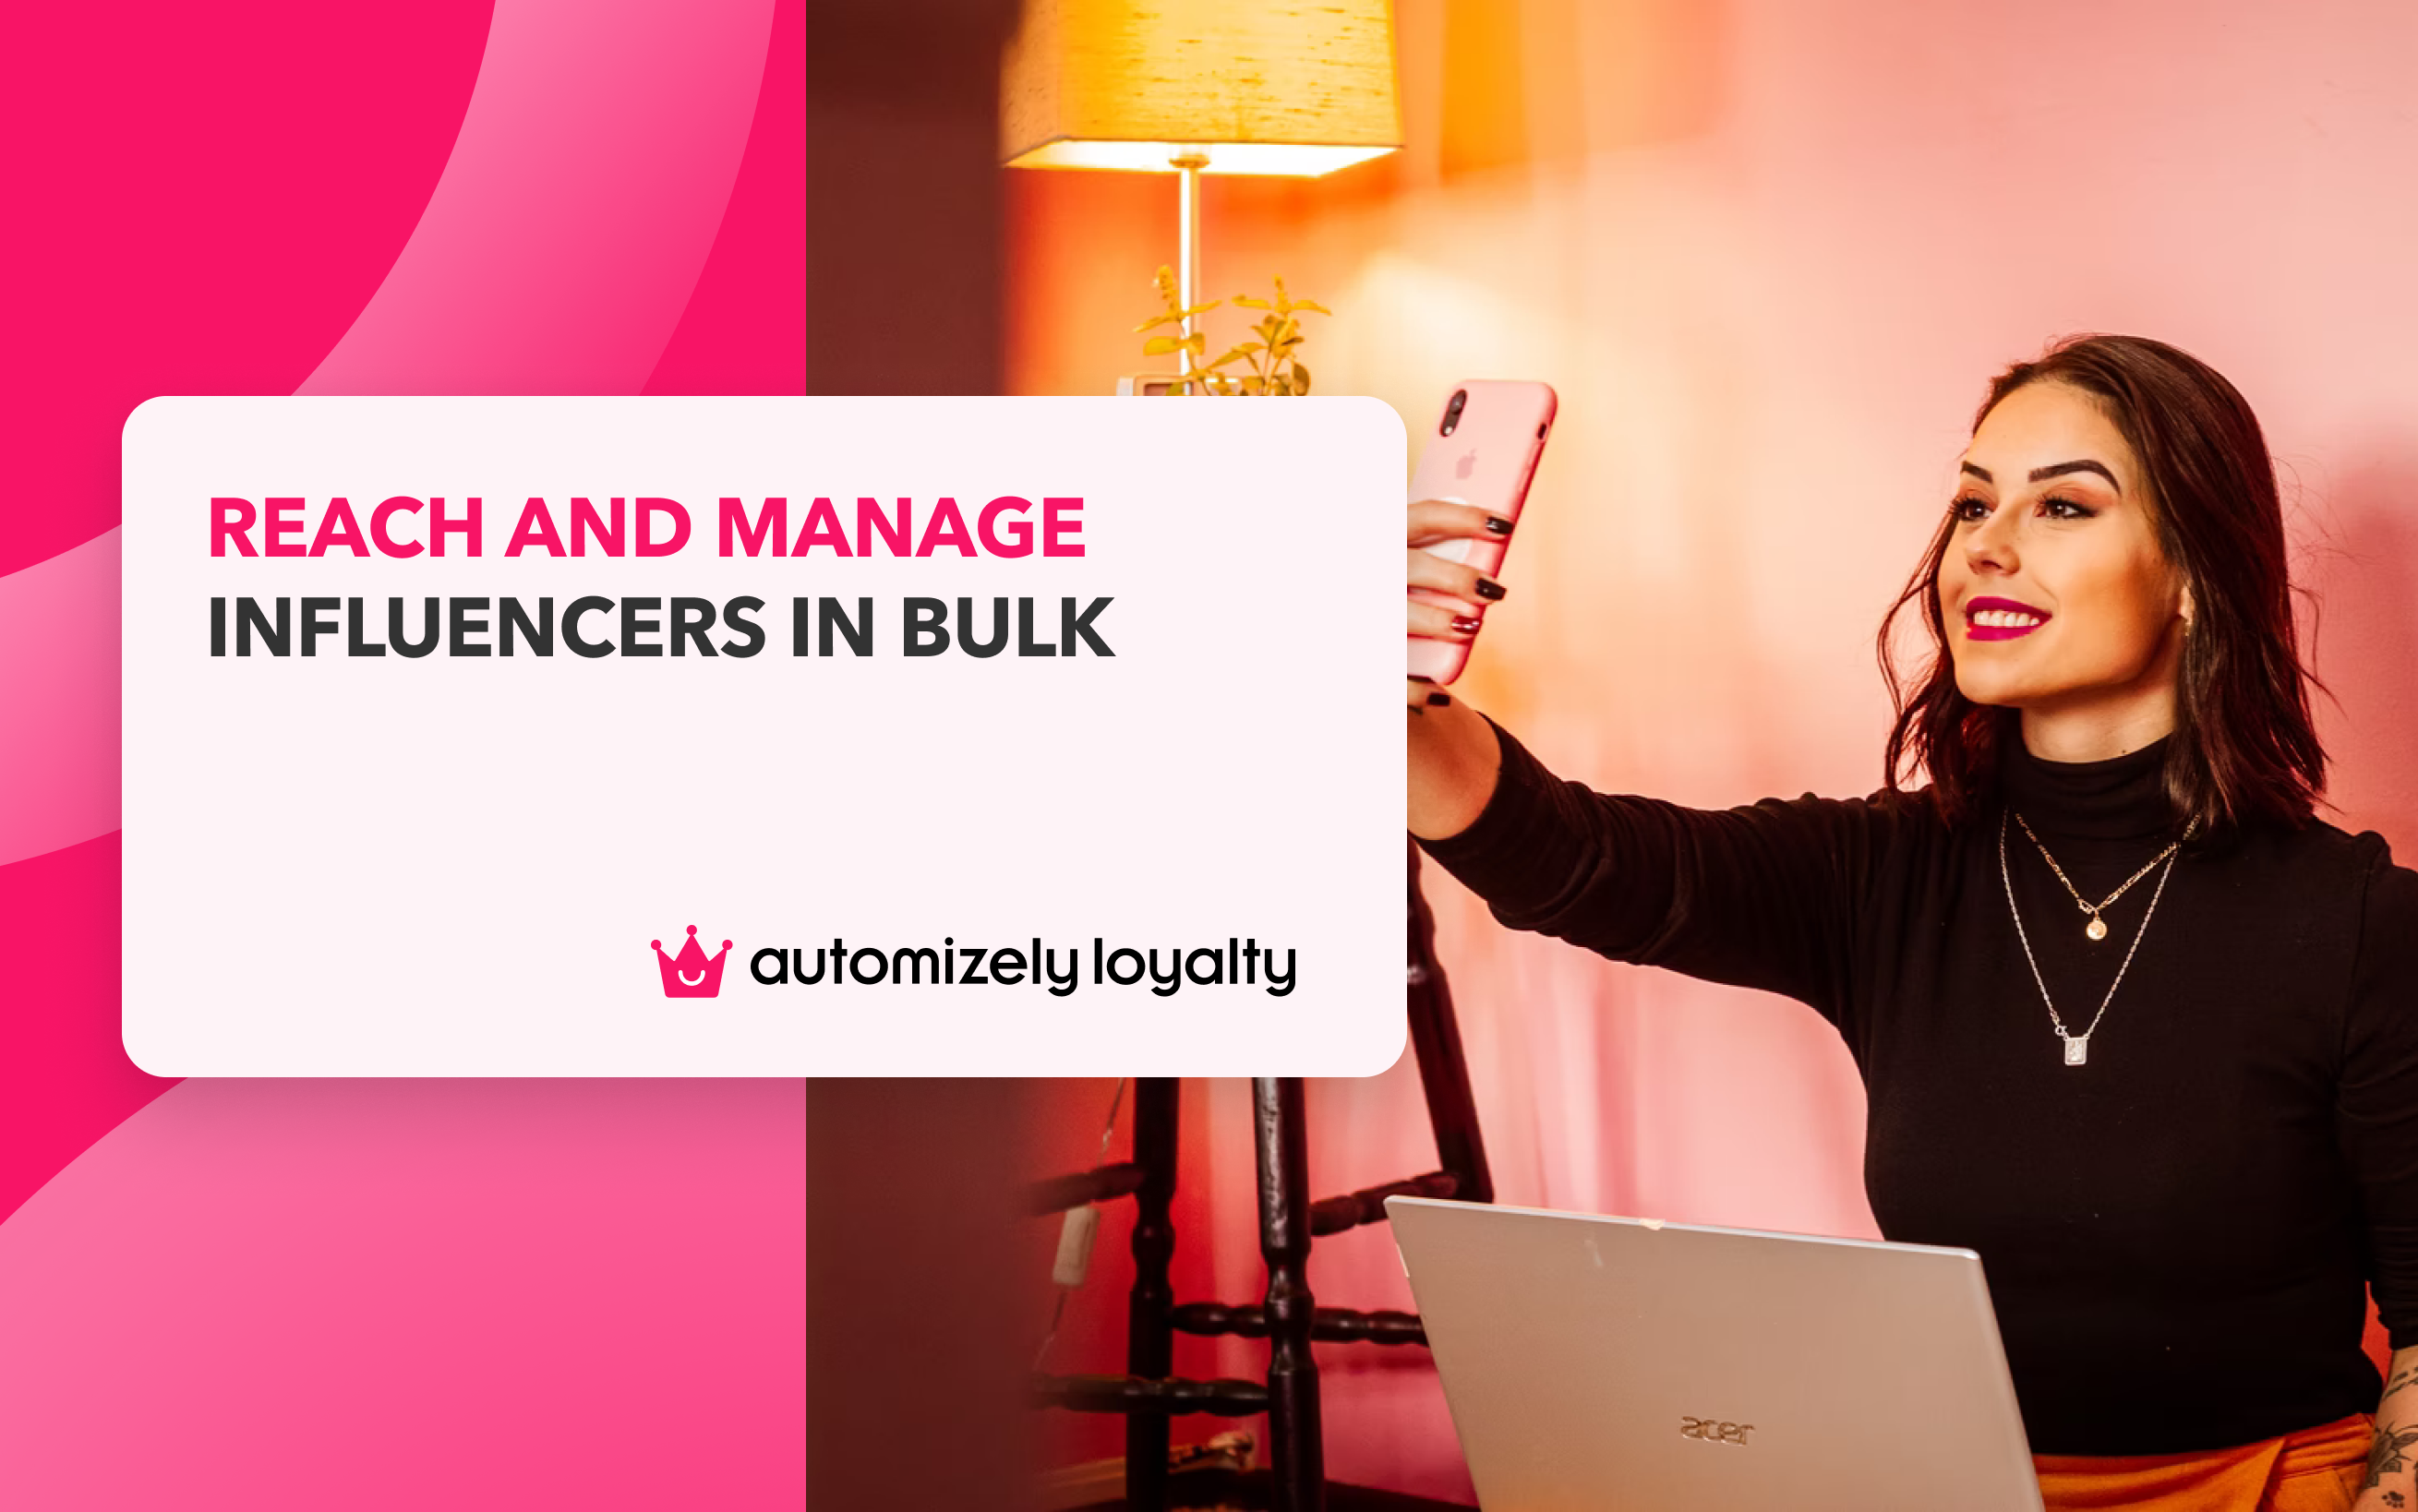 Boost your influencer marketing game with Automizely Loyalty's latest features